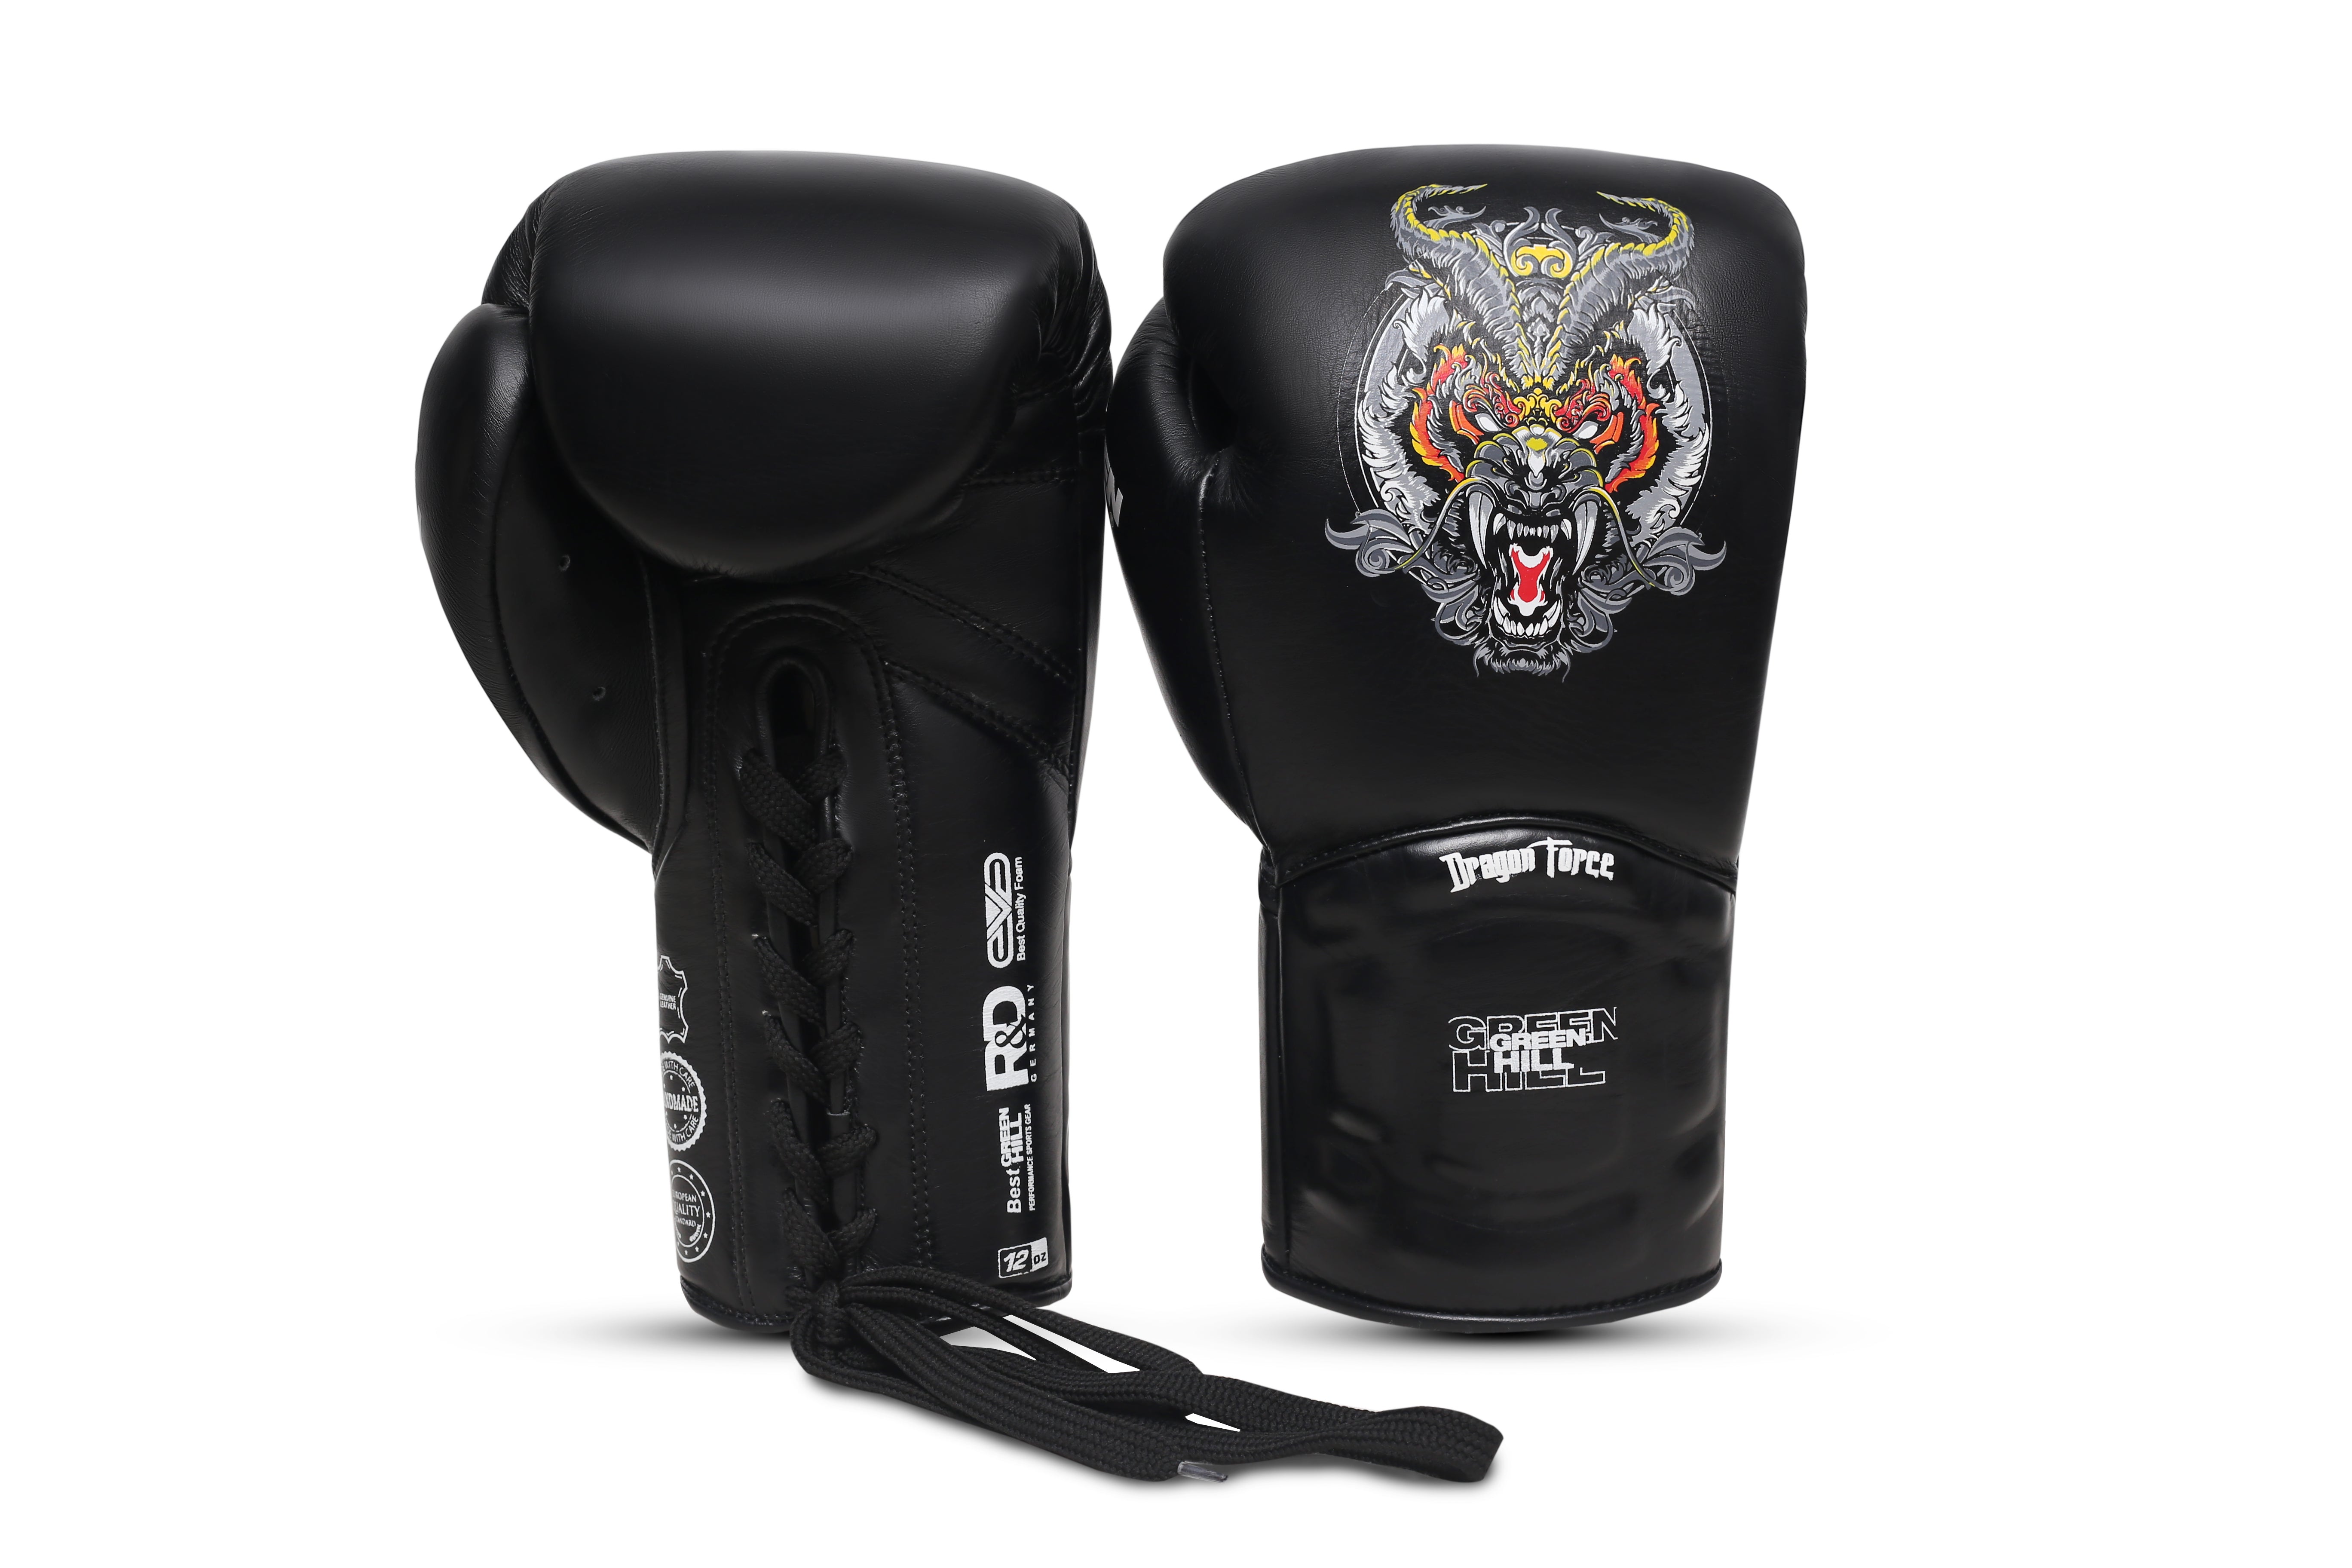 Dragon Force Boxing Gloves